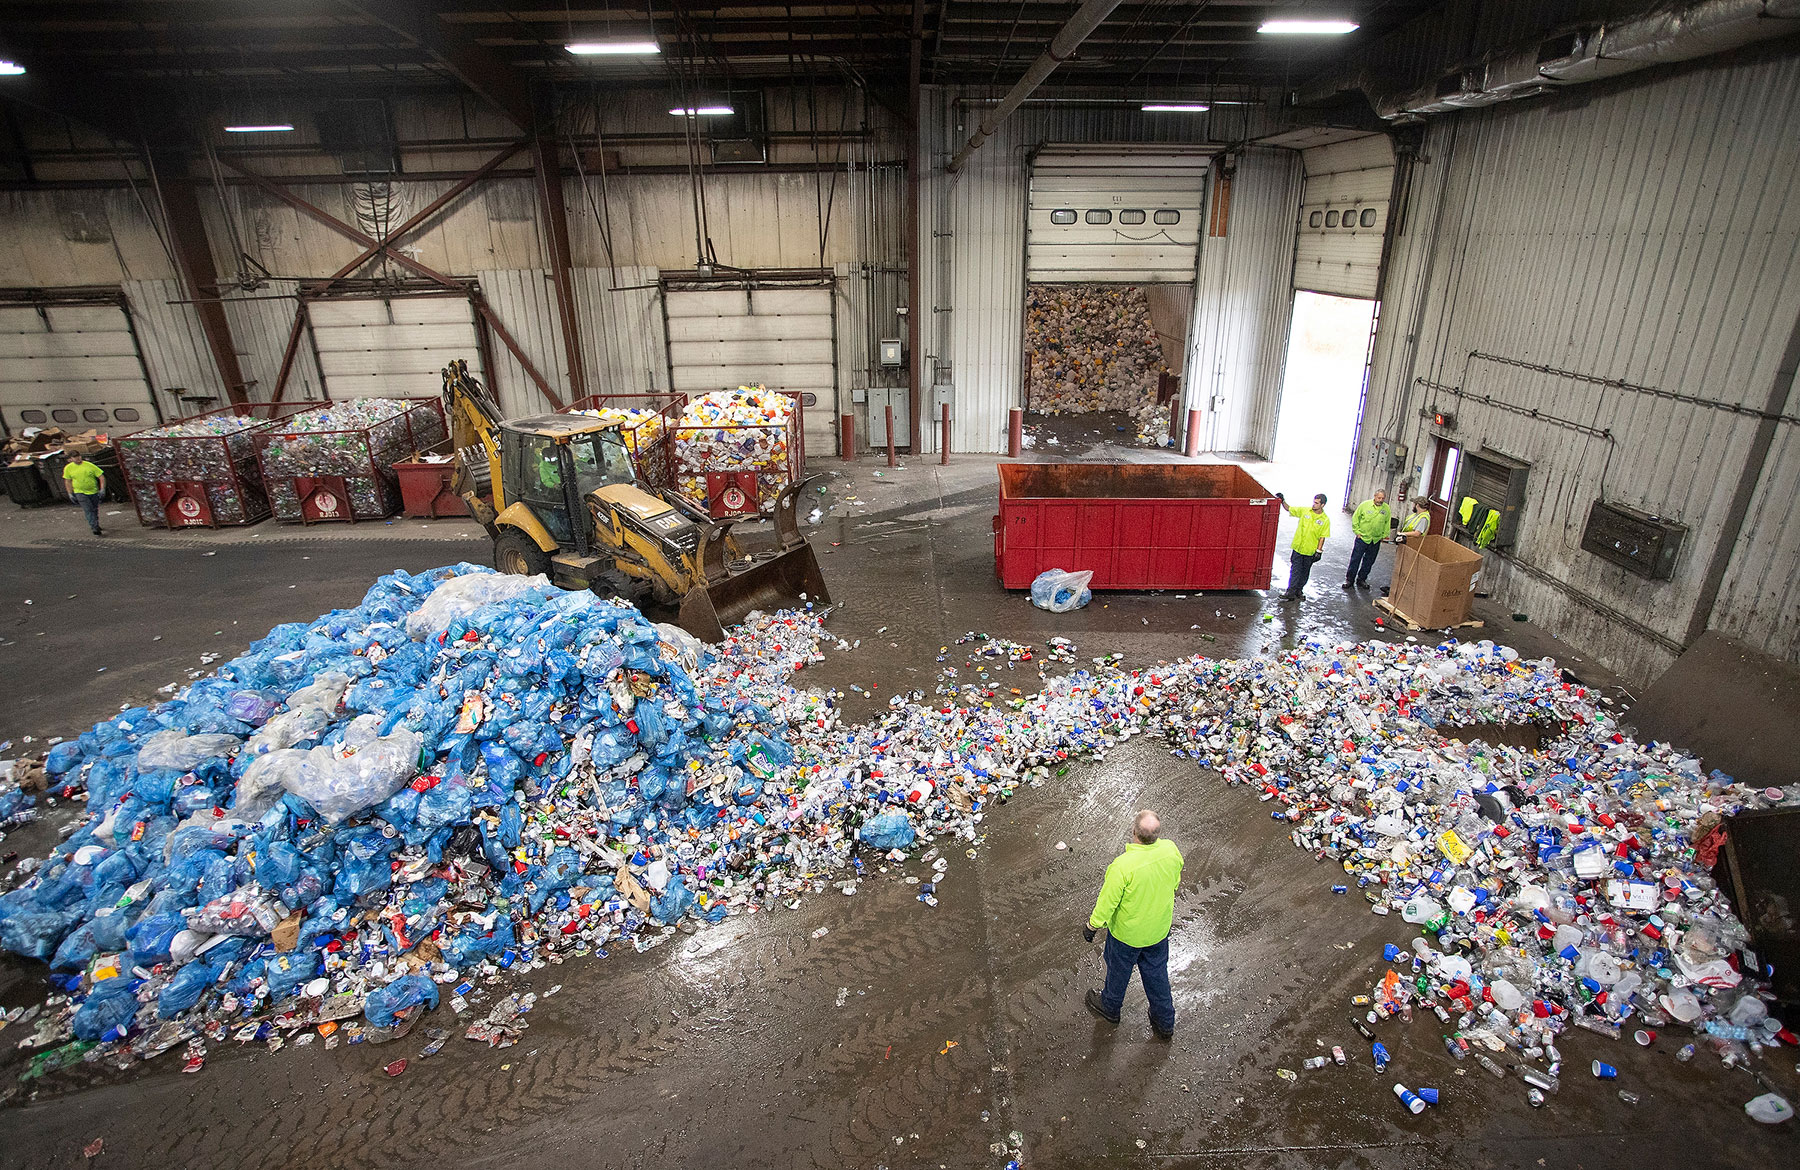 Inside photo at the local recycling center shows the sorting process that occurs after a game.